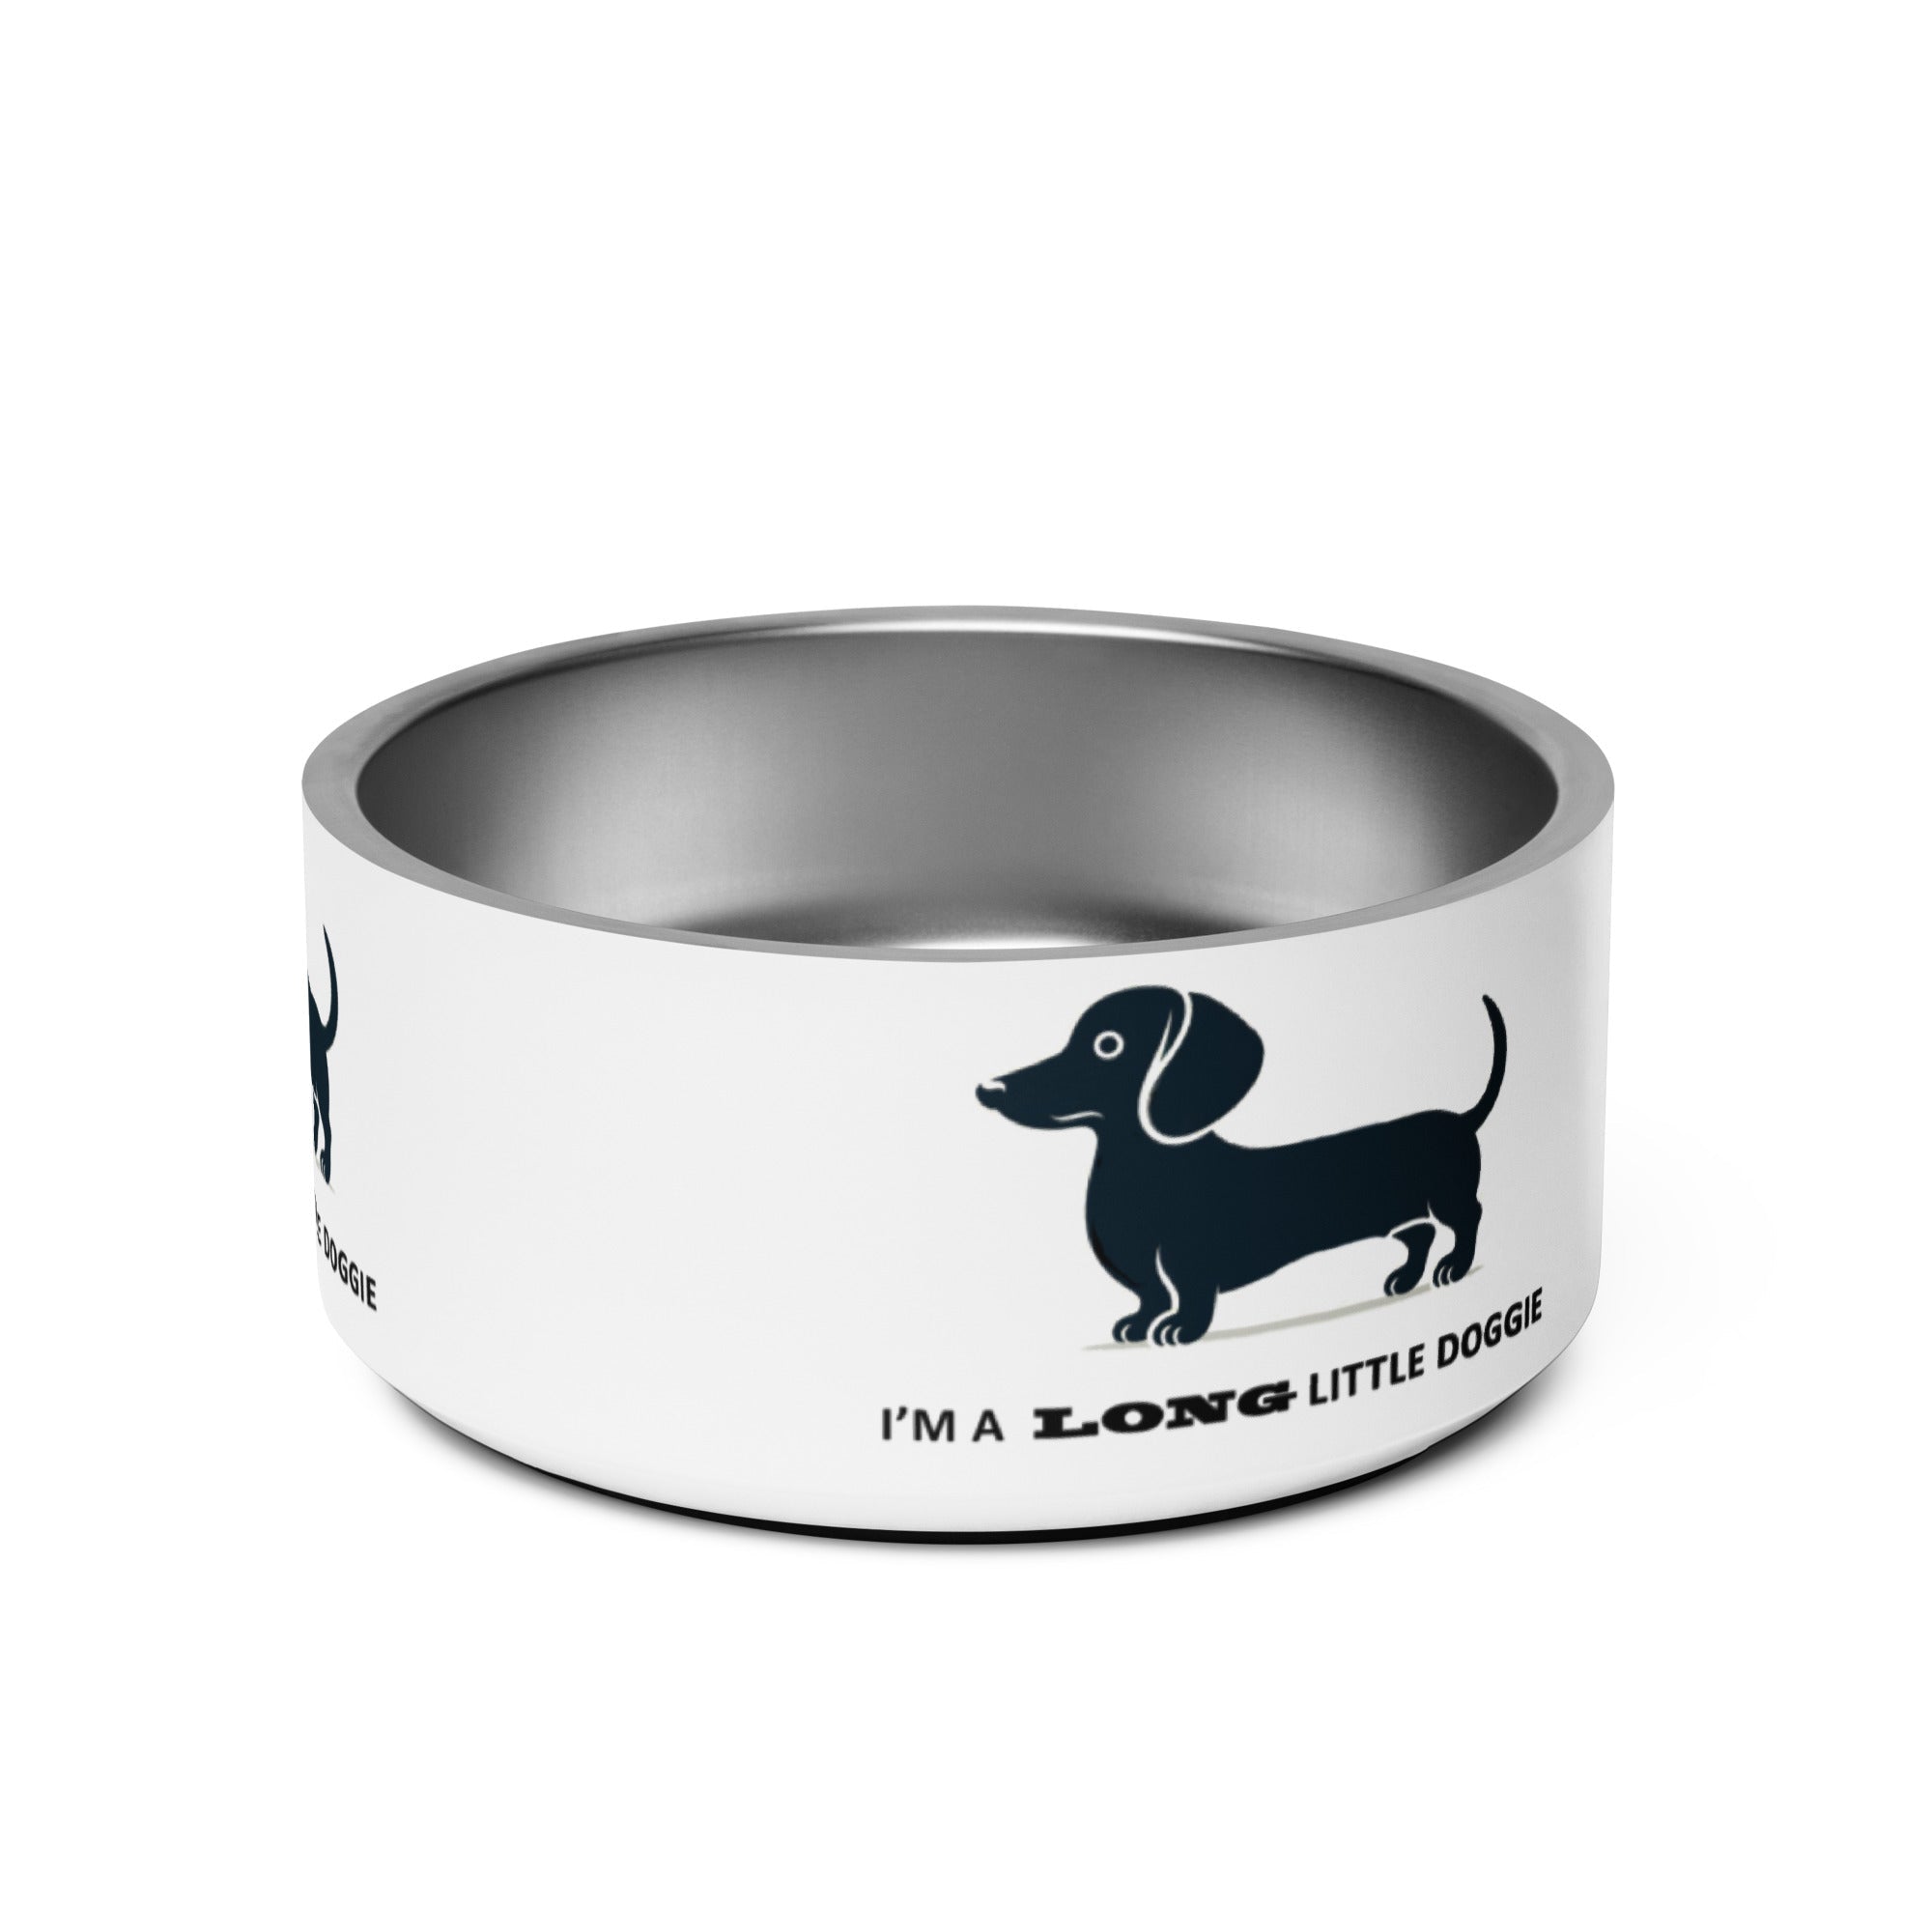 32 Oz Stainless Steel Pet Bowl with Cute Dachshund Design Online